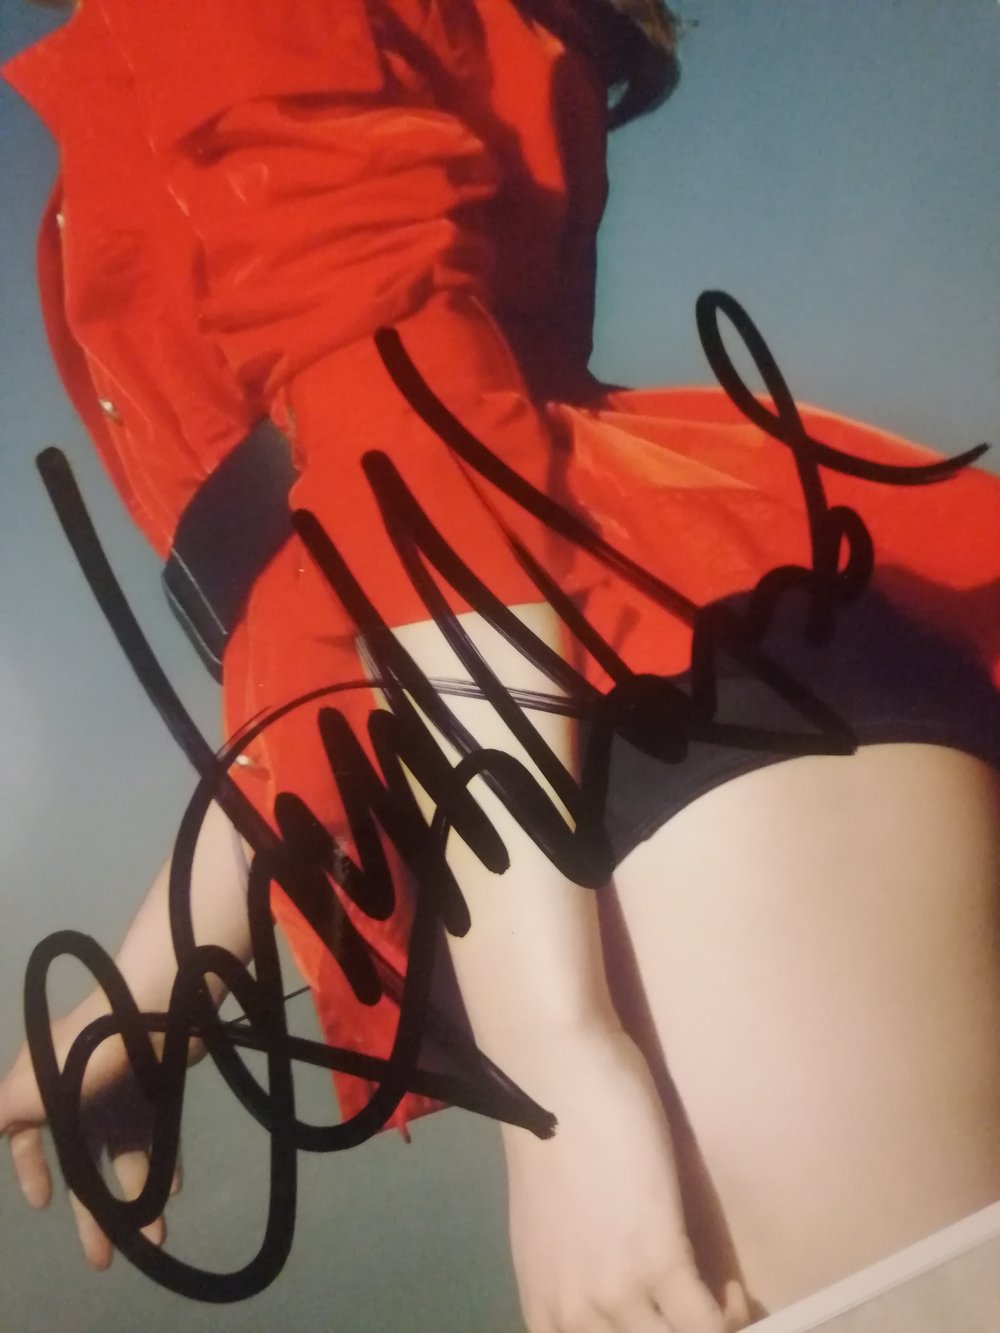 Amber Heard Signed A4 Glamour Photo